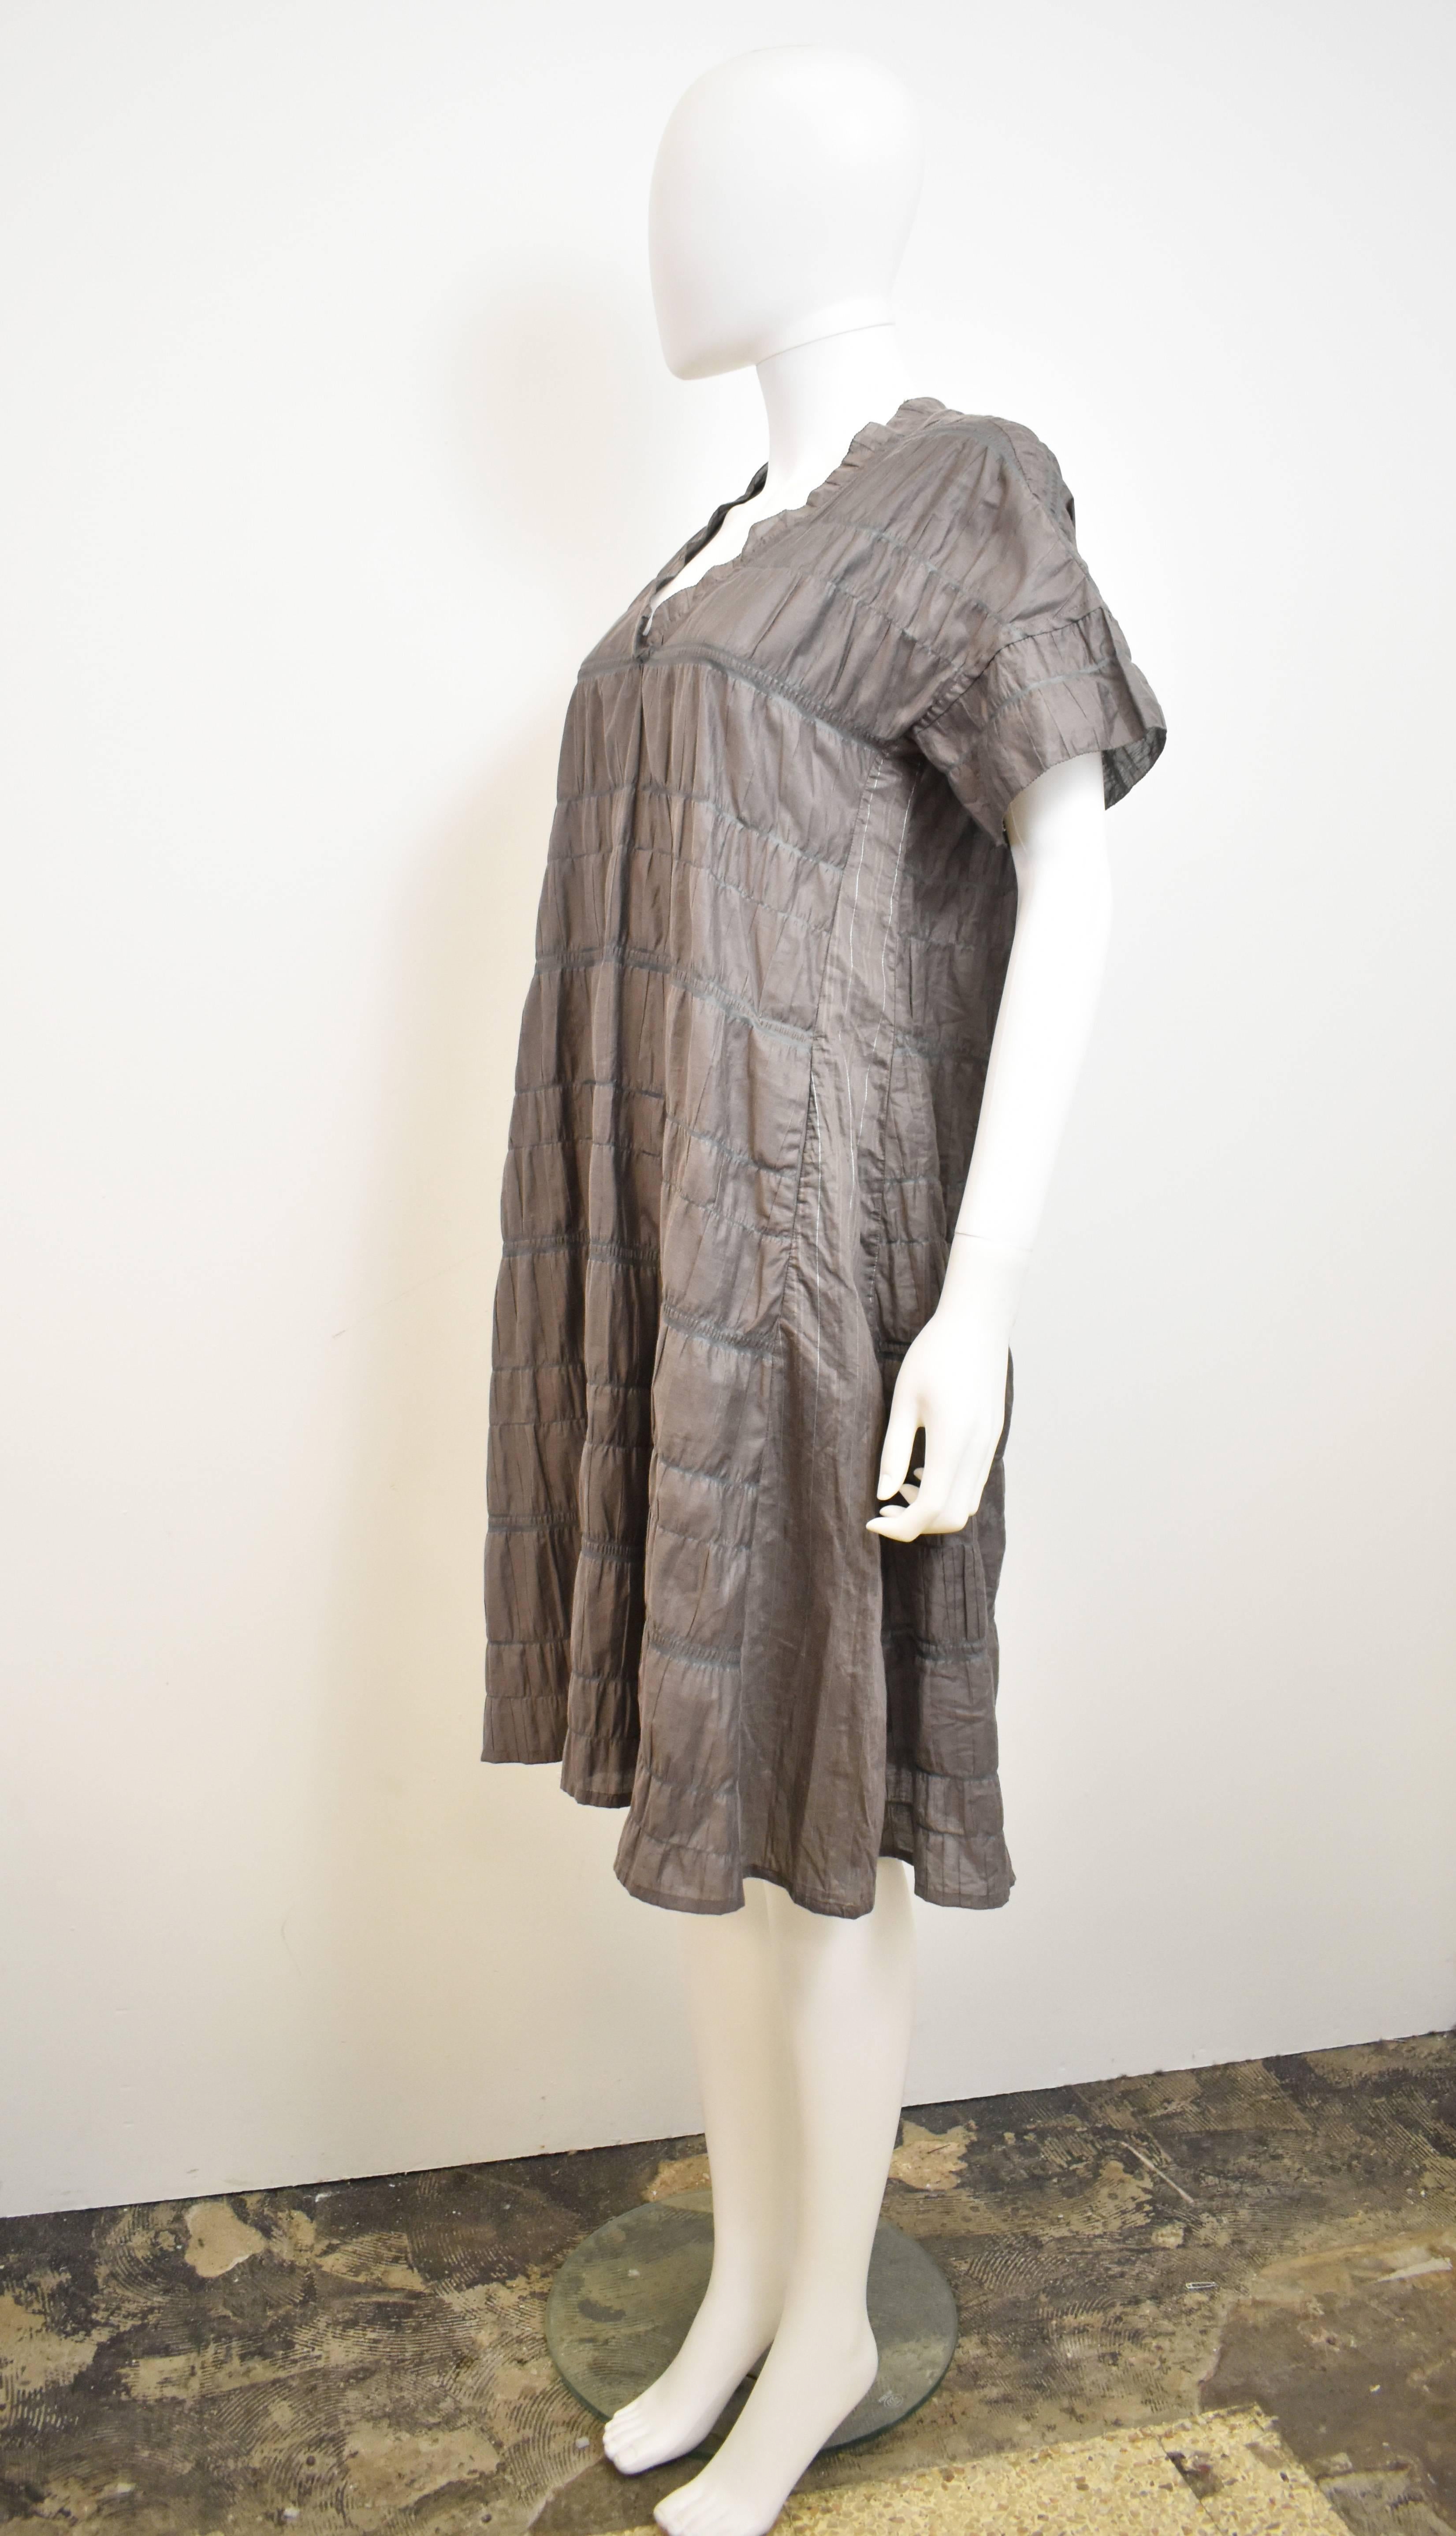 A grey pleated dress by Issey Miyake’s diffusion line Haat. The dress has a simple, loose shape, with V-neck, short sleeves and knee length skirt. The dress is made from a cotton and synthetic material blend which has been heat pleated vertically